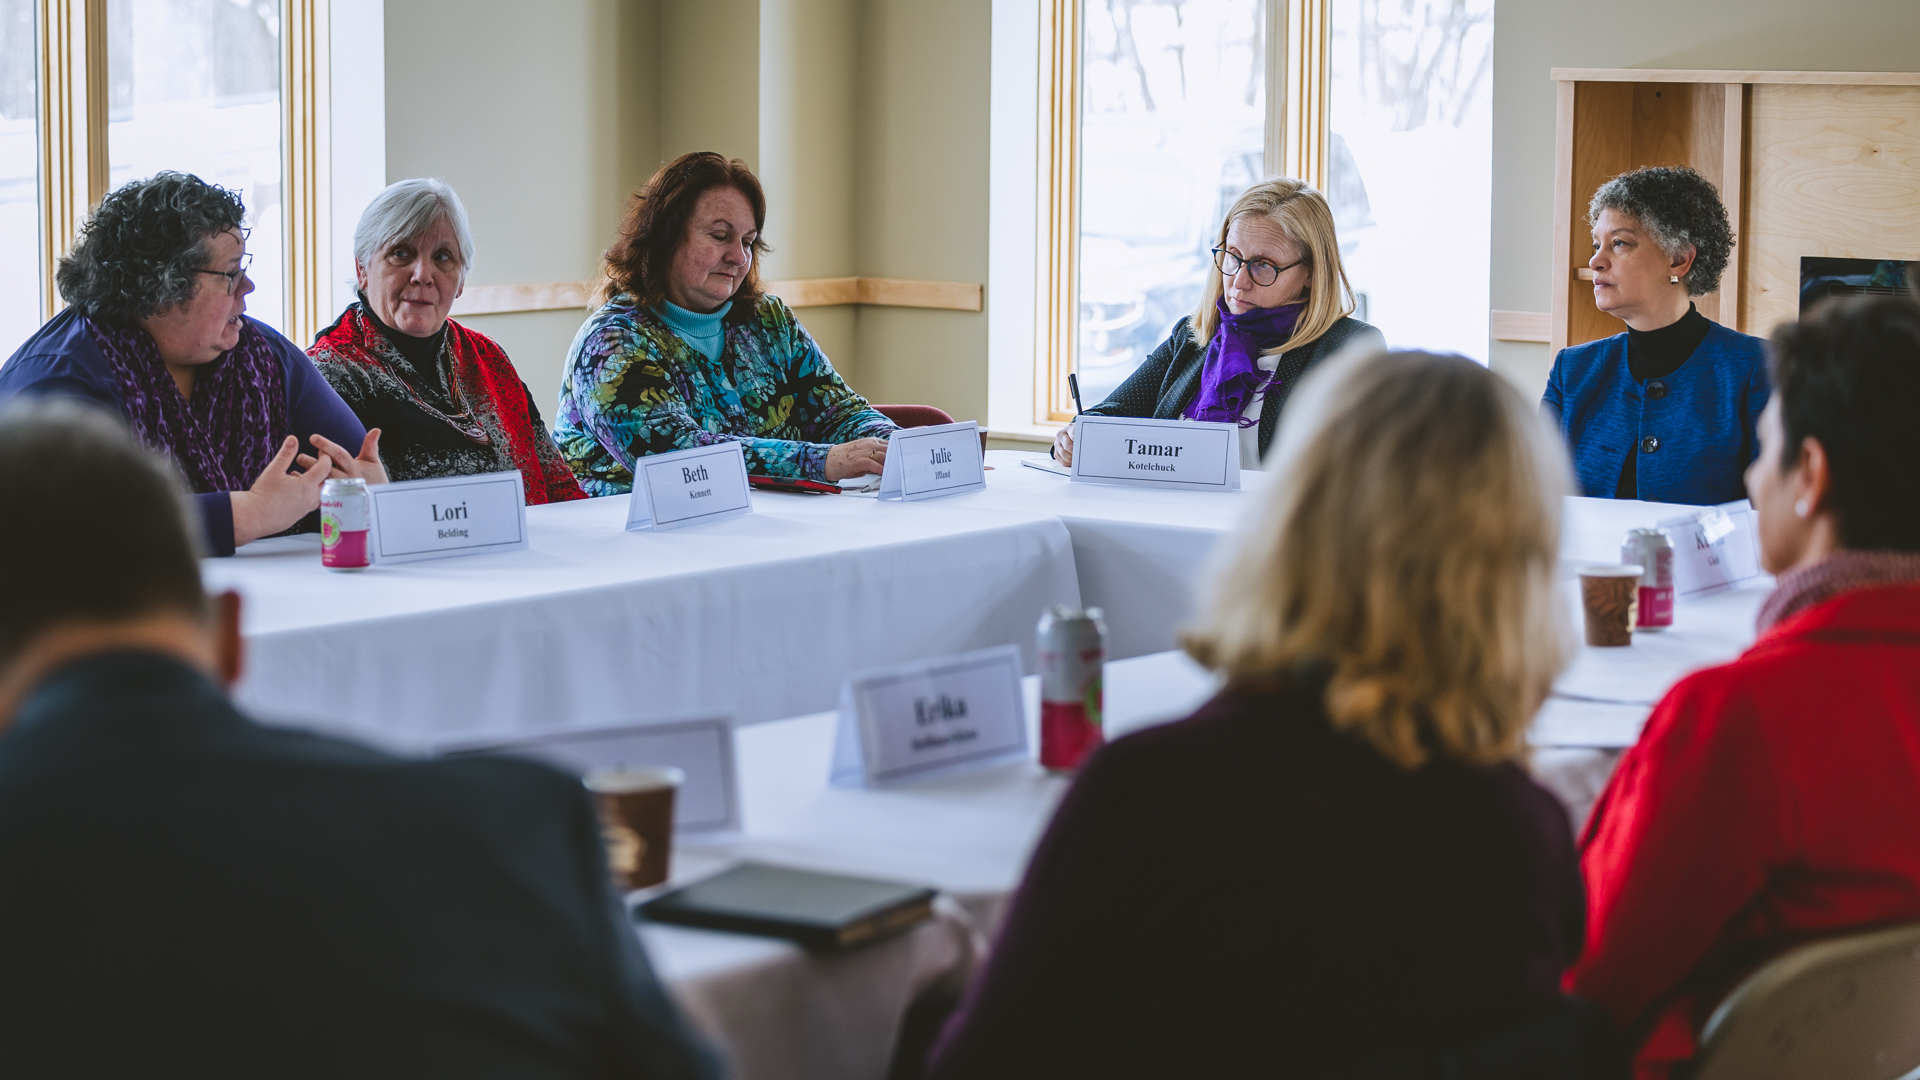 Photo of Susan listening during a roundtable discussion with WCC White River Valley Team.